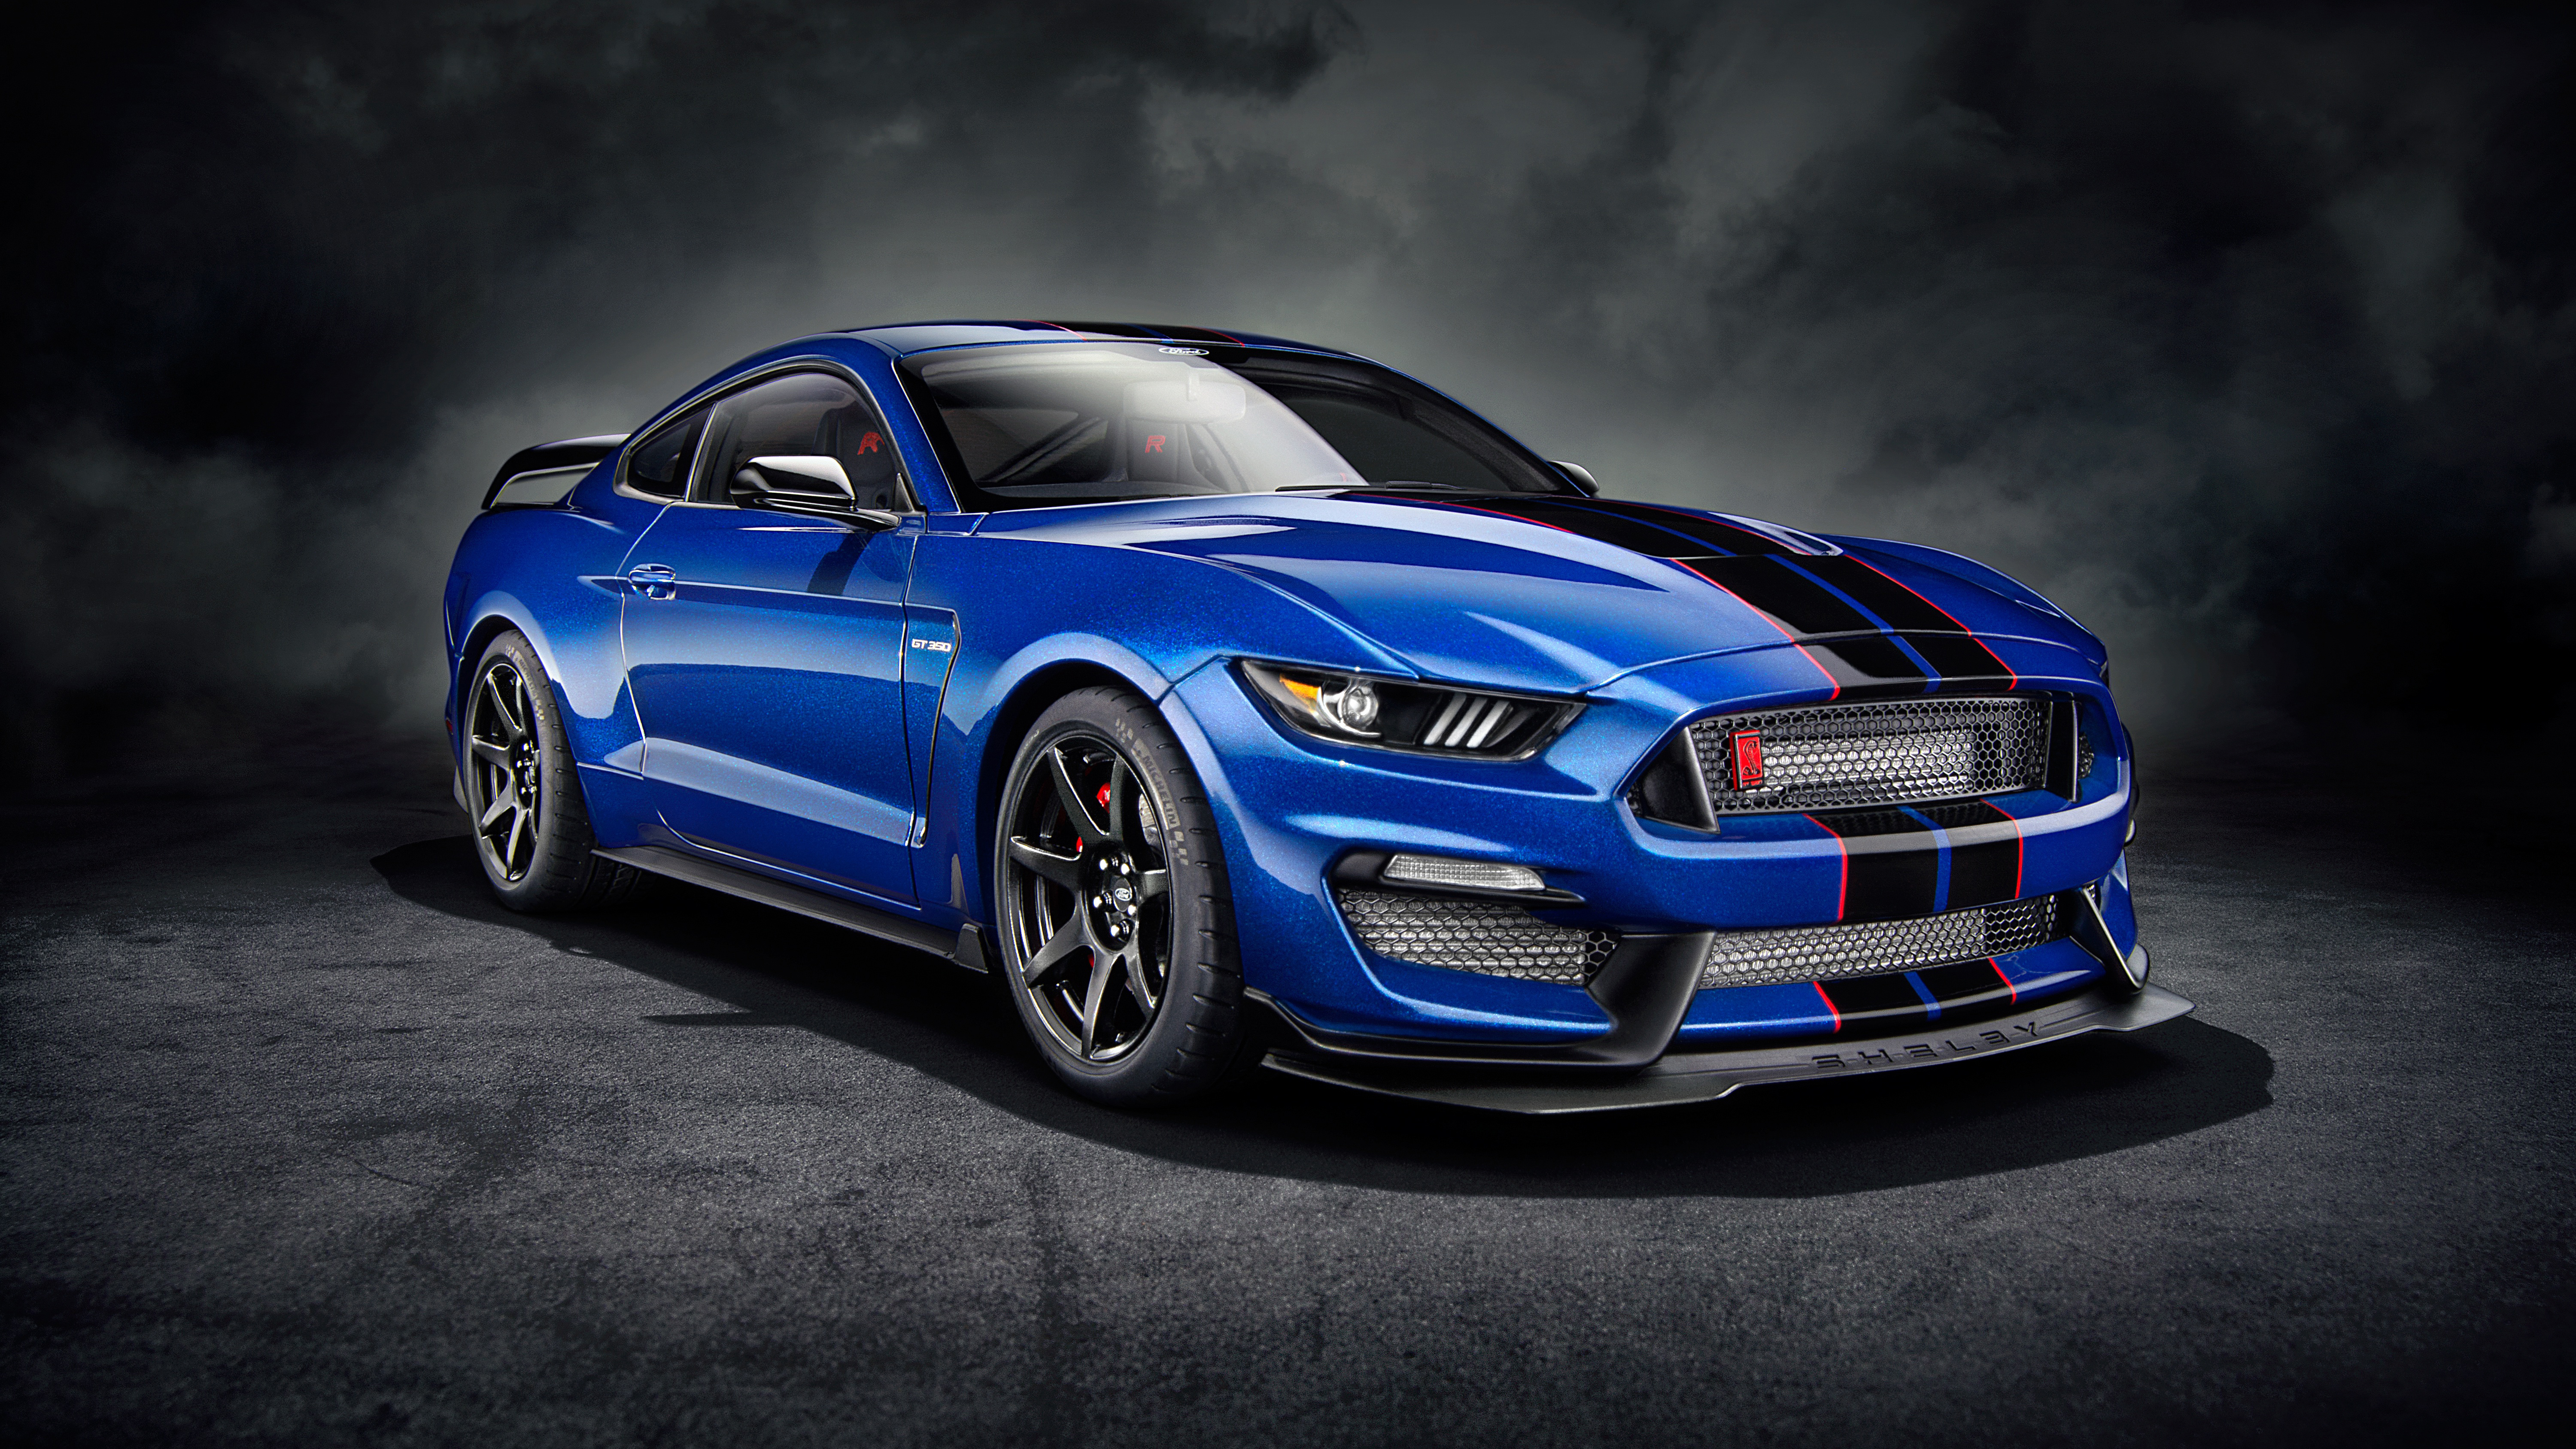 Ford Mustang Shelby Gt Wallpaper Hd Wallpapers Hd Wallpapers Id Images And Photos Finder